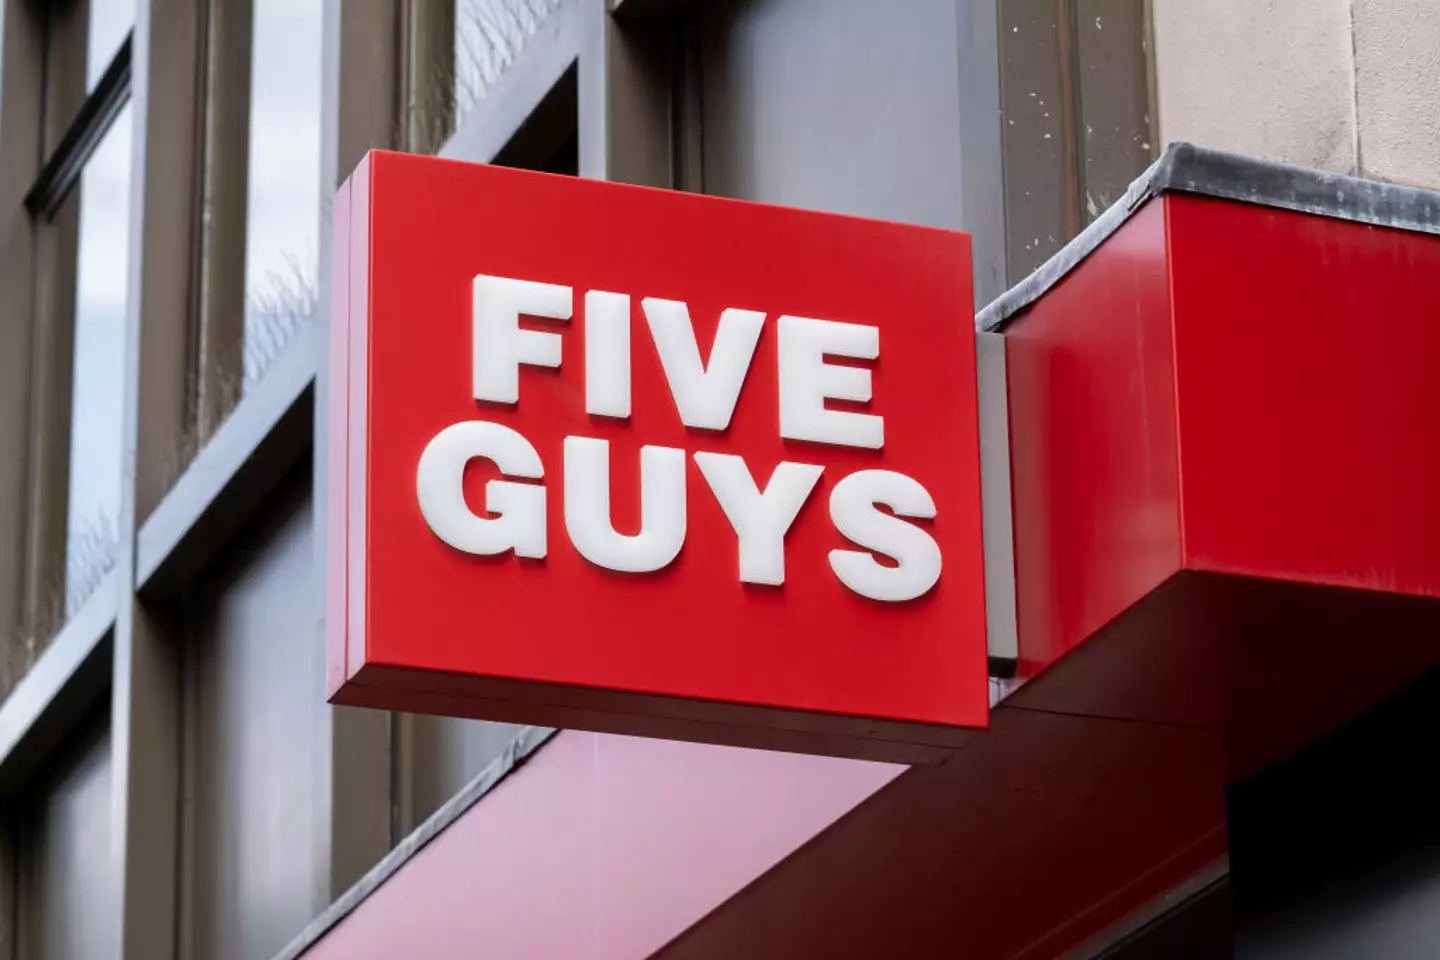 The CEO of Five Guys has commented on their prices in the past.